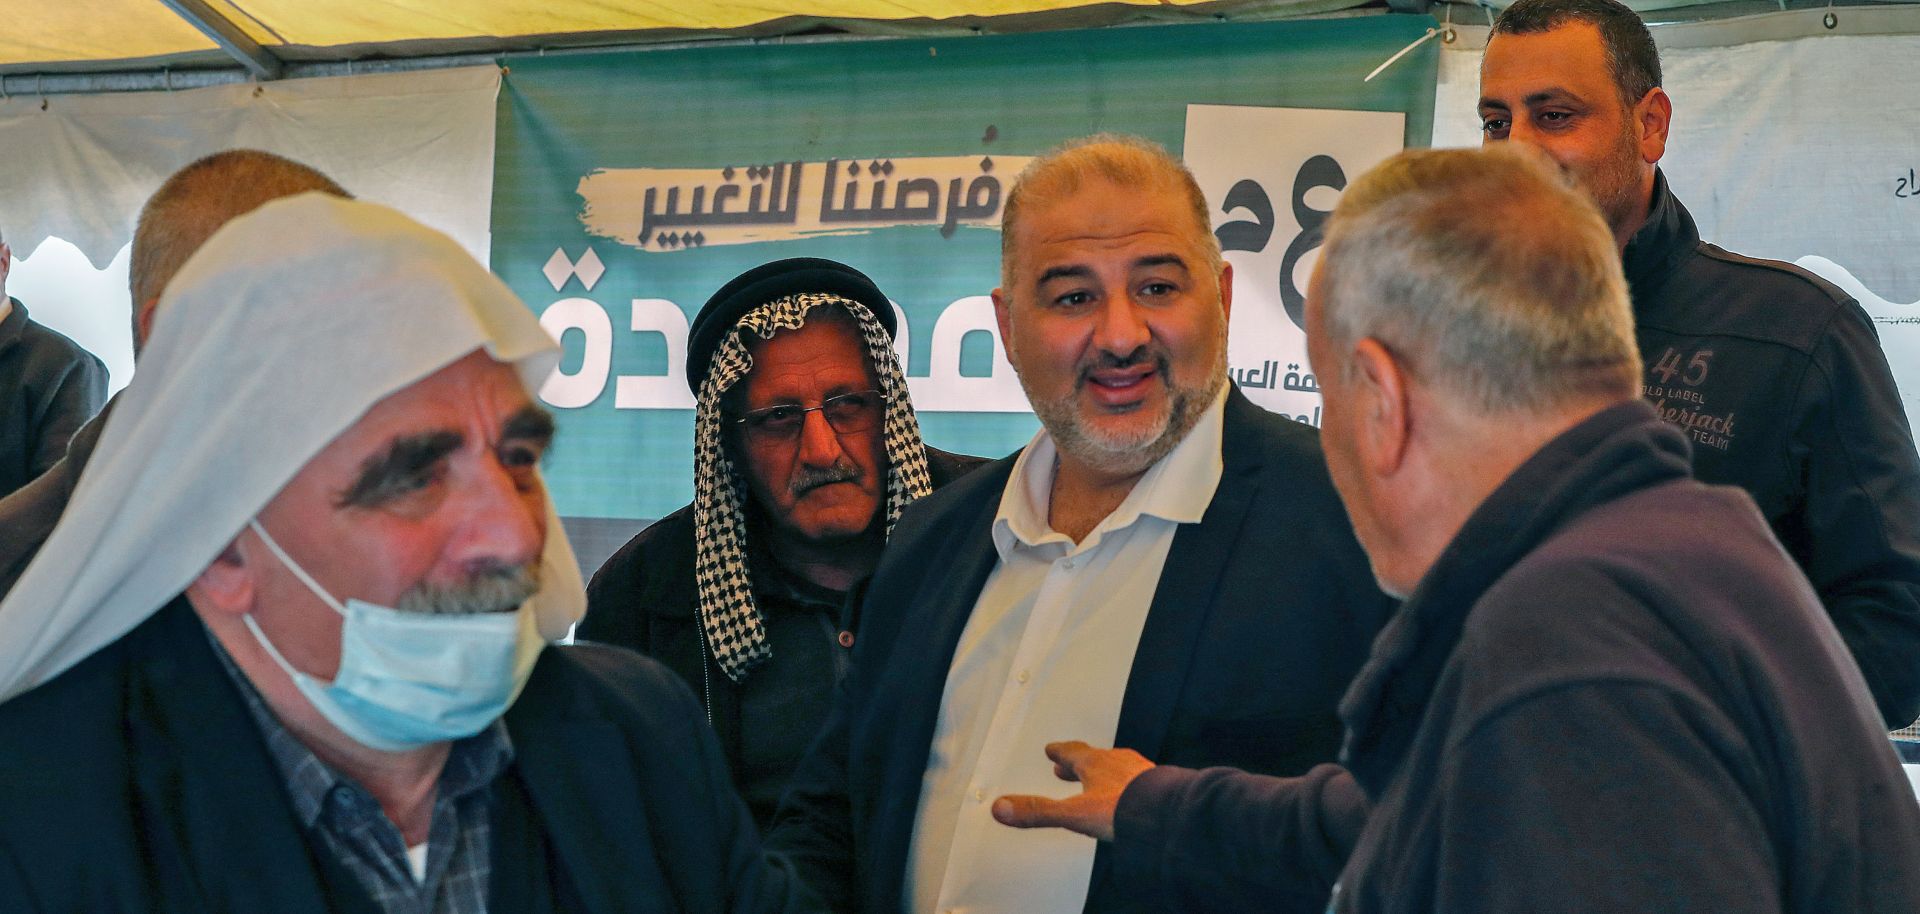 Mansour Abbas, head of Israel's Islamic Ra’am party, speaks with supporters during a rally in the northern Israeli village of Maghar on March 26, 2021.